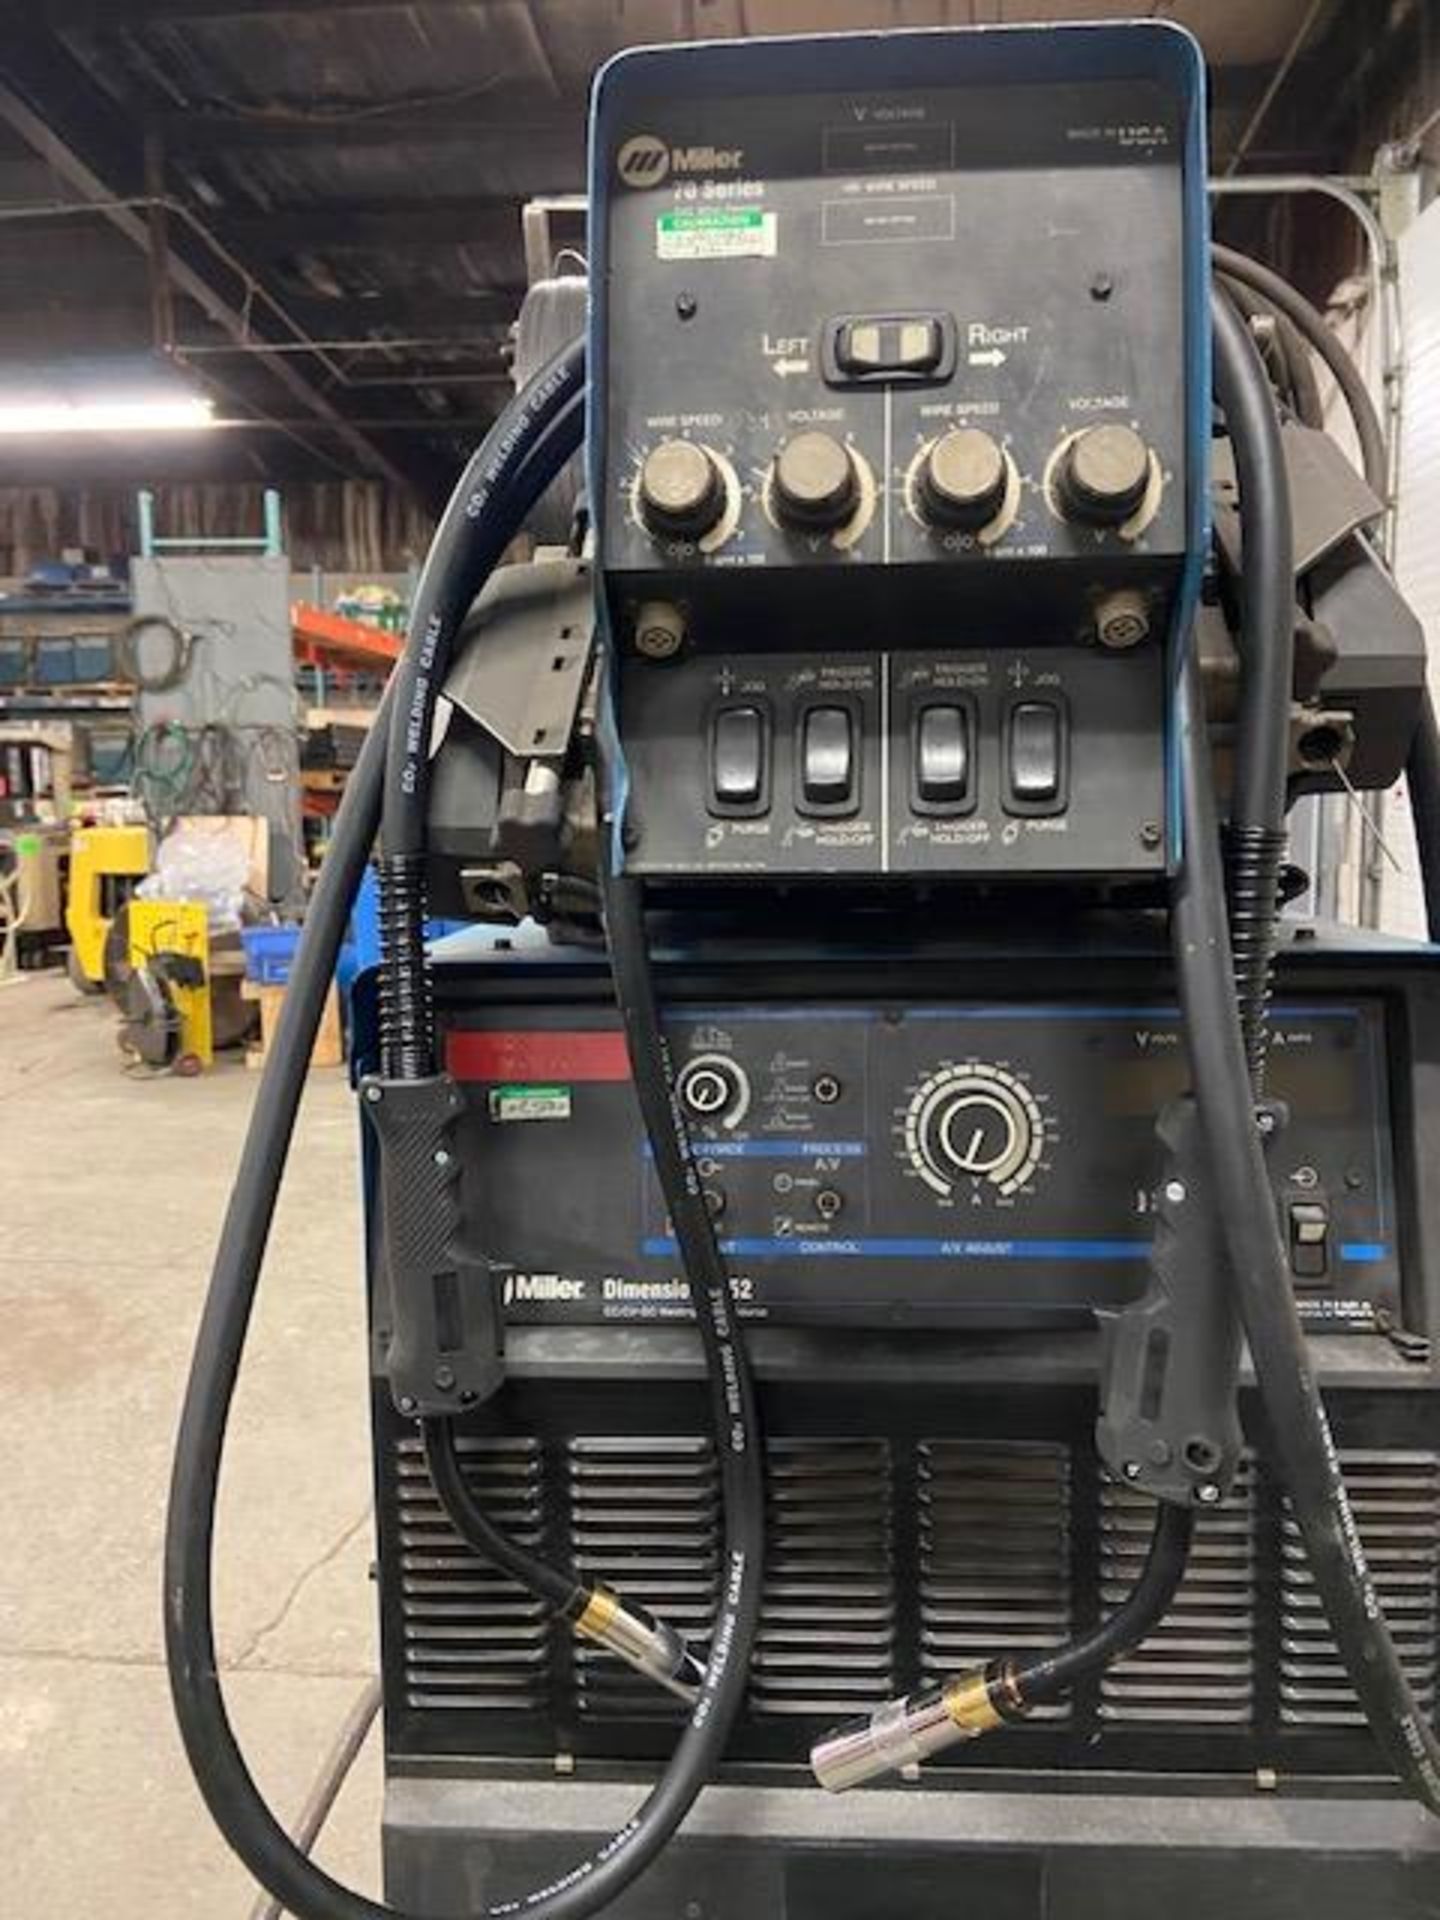 Miller Dimension 652 Mig Welder 650 Amp Mig Tig Stick with DUAL 70 Series Wire Feeder with 2 Mig - Image 3 of 3